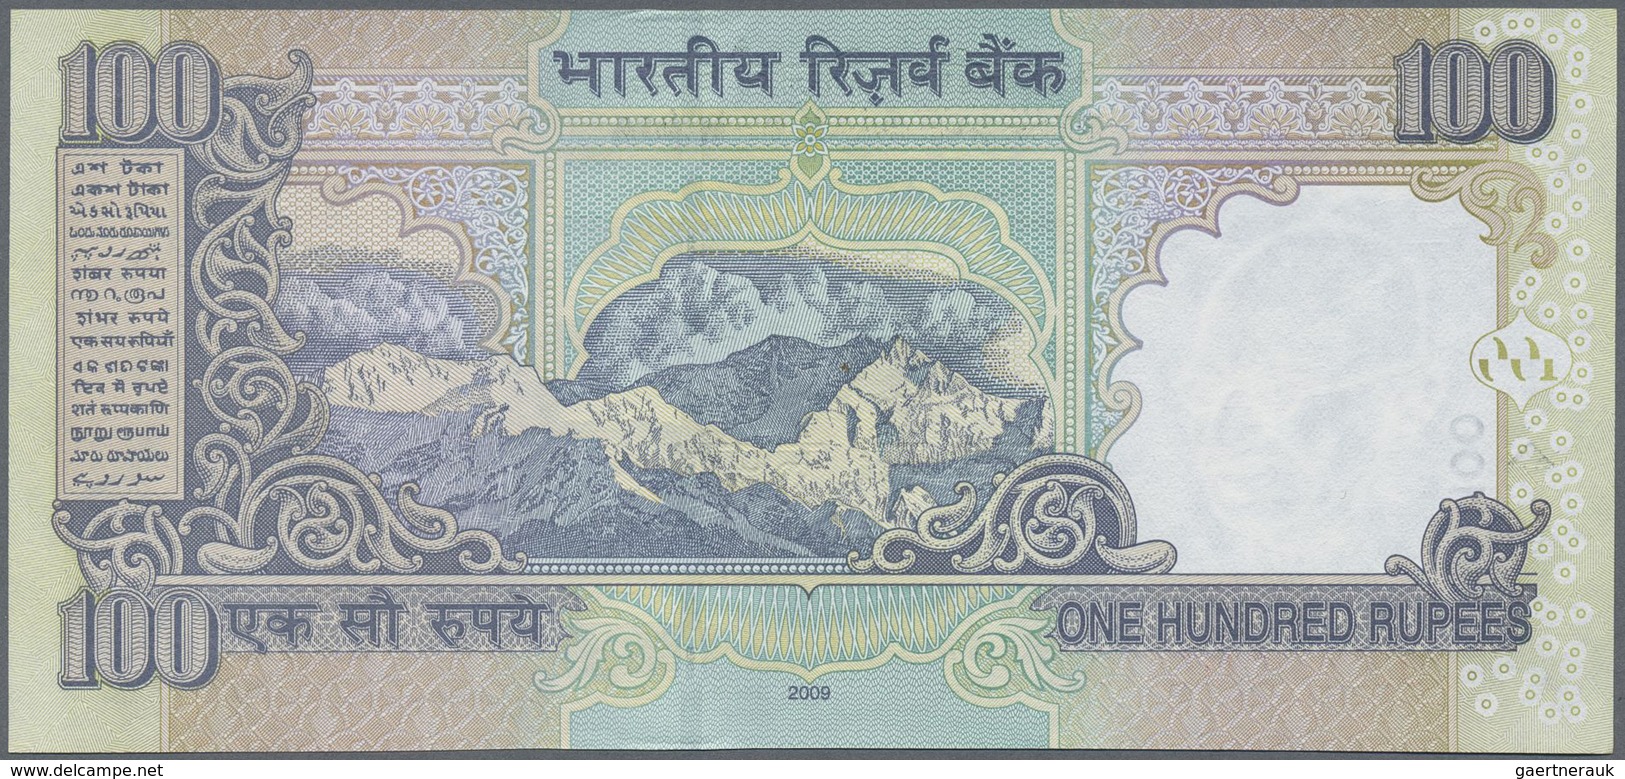 India / Indien: 10, 20, 50, 100, 500, 1000 Rupees, all first prefix 0AA 000008, P.95-100 in UNC (6 p